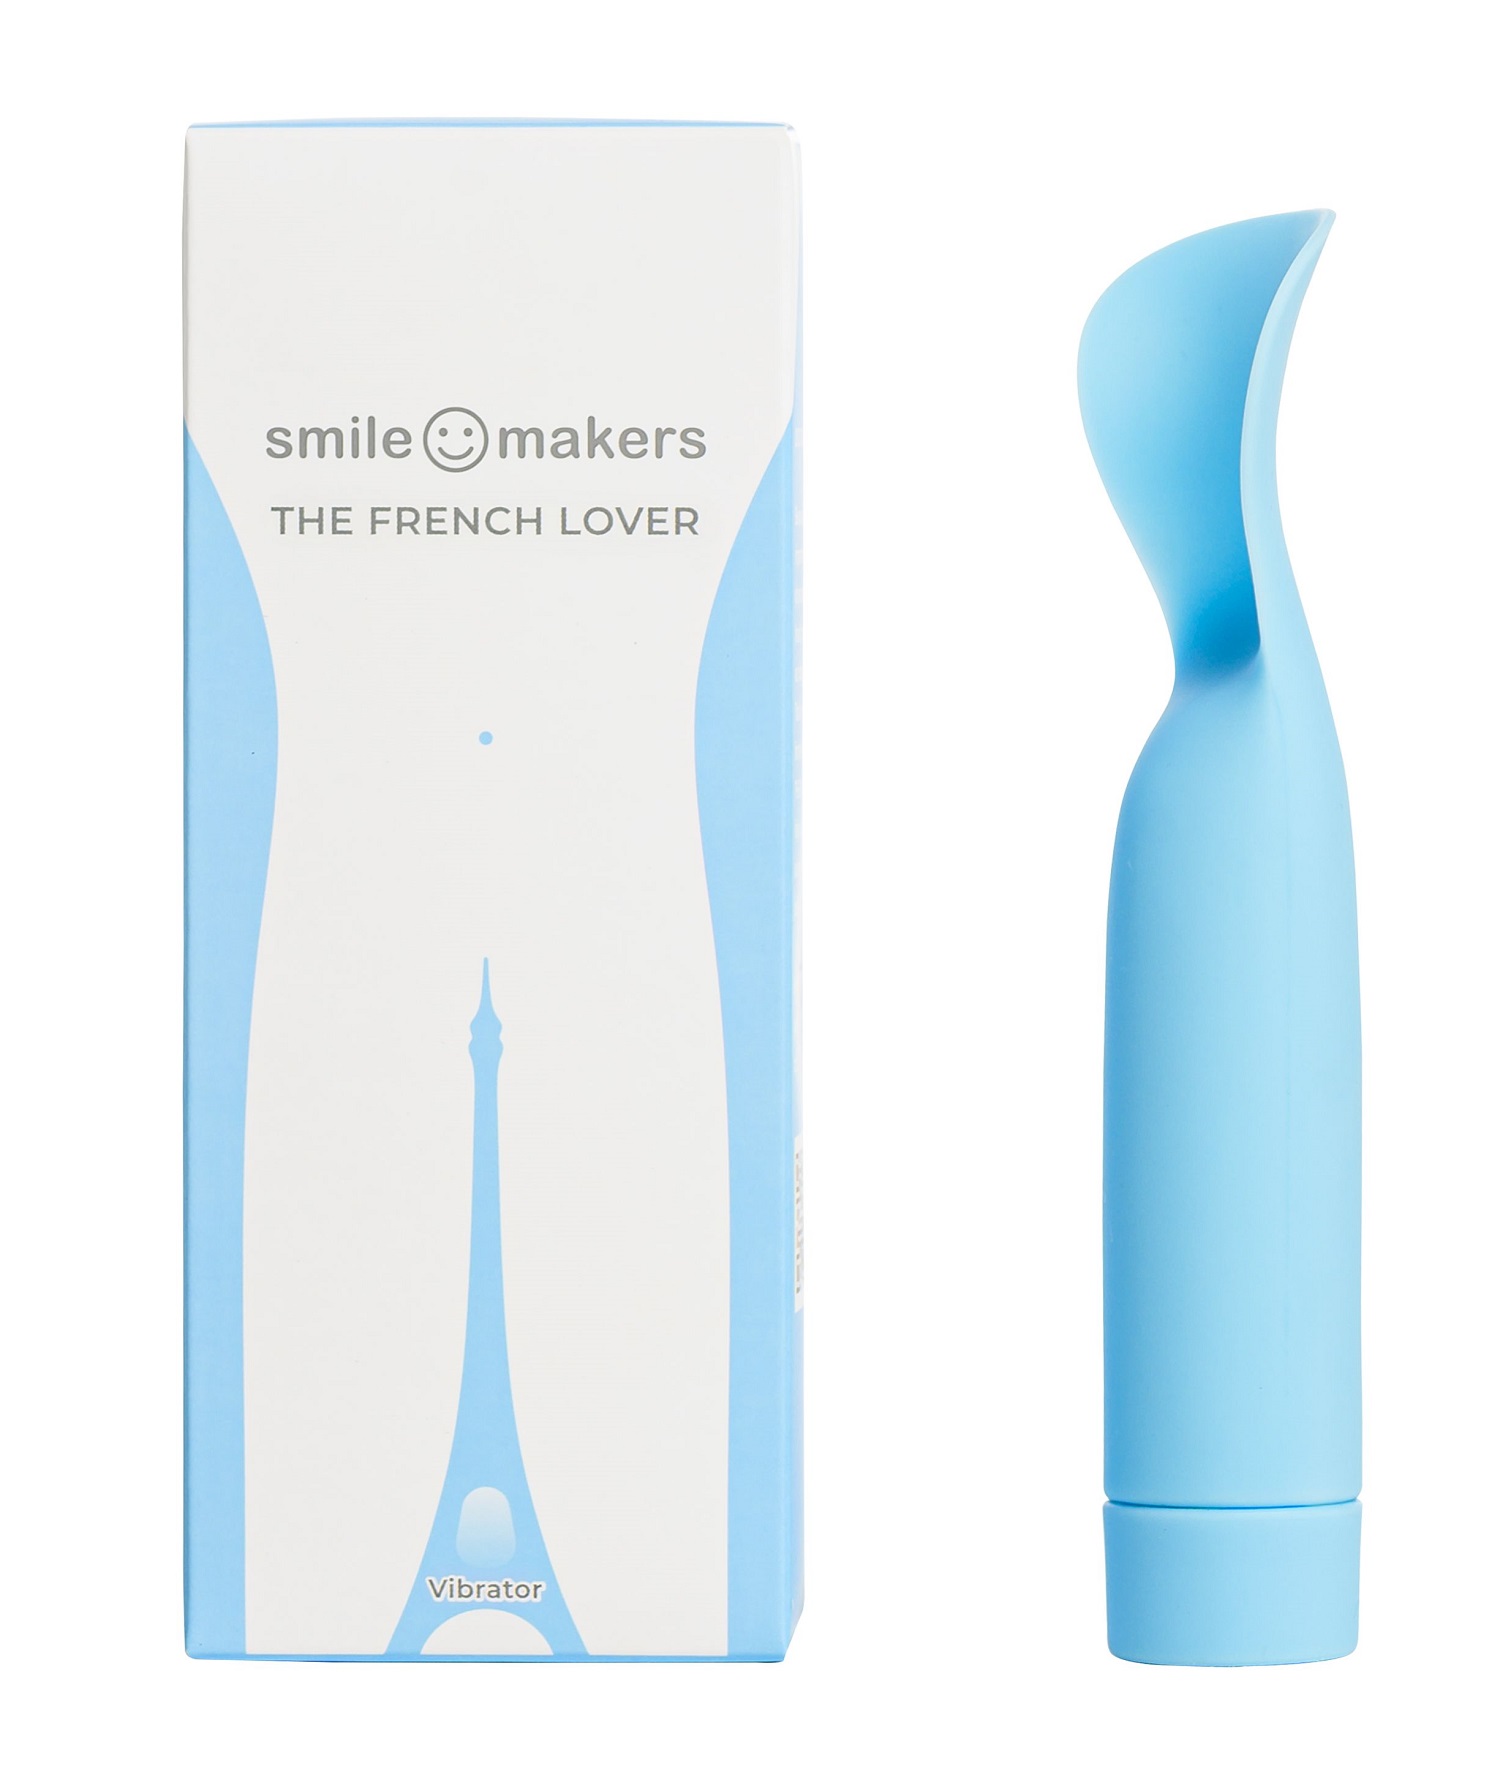 Frenchlover smilemakers